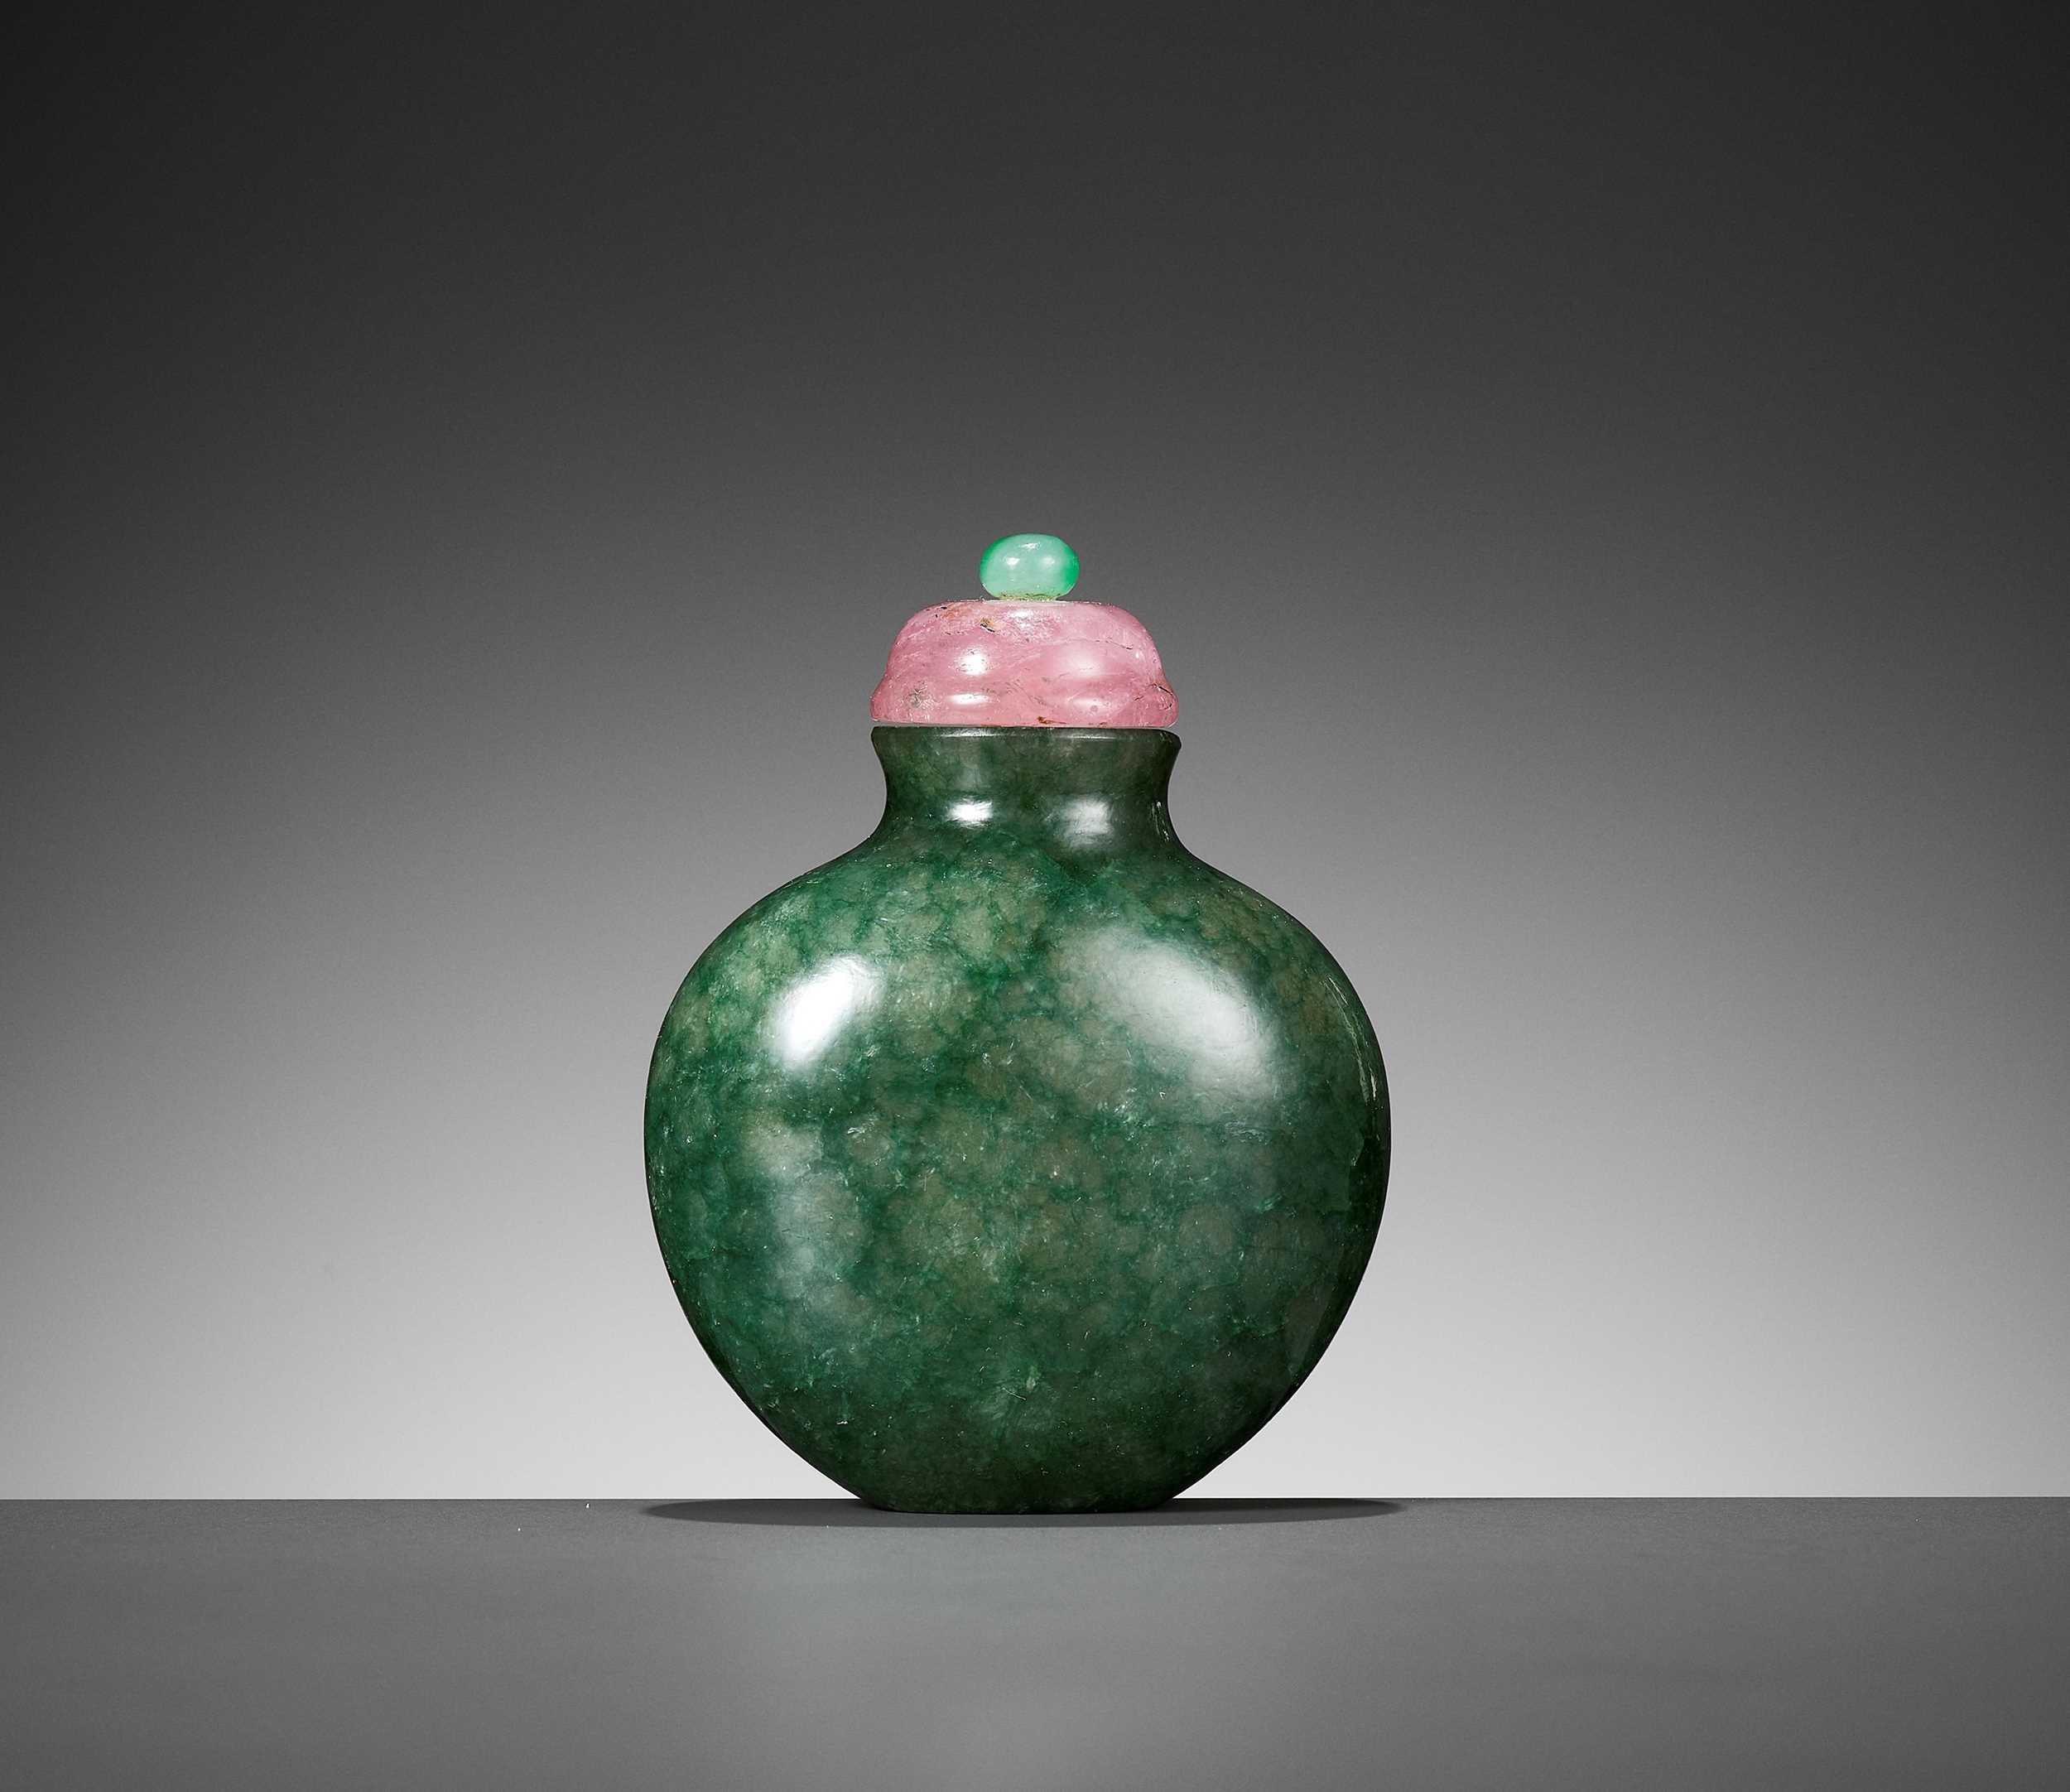 Lot 63 - A VERY FINE AND RARE MOTTLED EMERALD-GREEN JADEITE SNUFF BOTTLE, 1780-1880